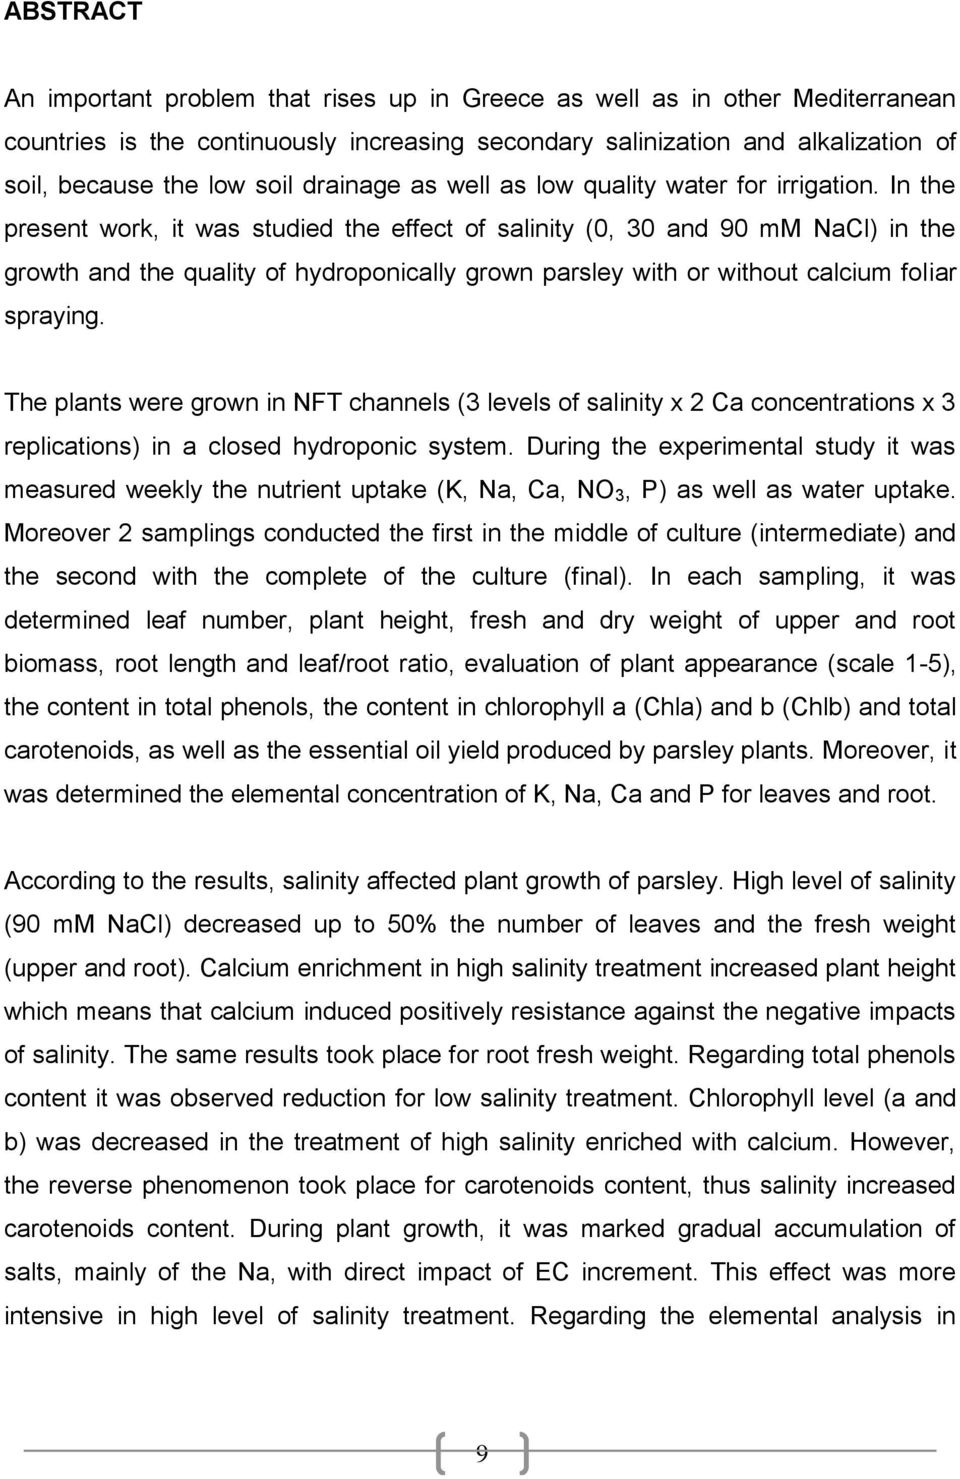 In the present work, it was studied the effect of salinity (0, 30 and 90 mm NaCl) in the growth and the quality of hydroponically grown parsley with or without calcium foliar spraying.